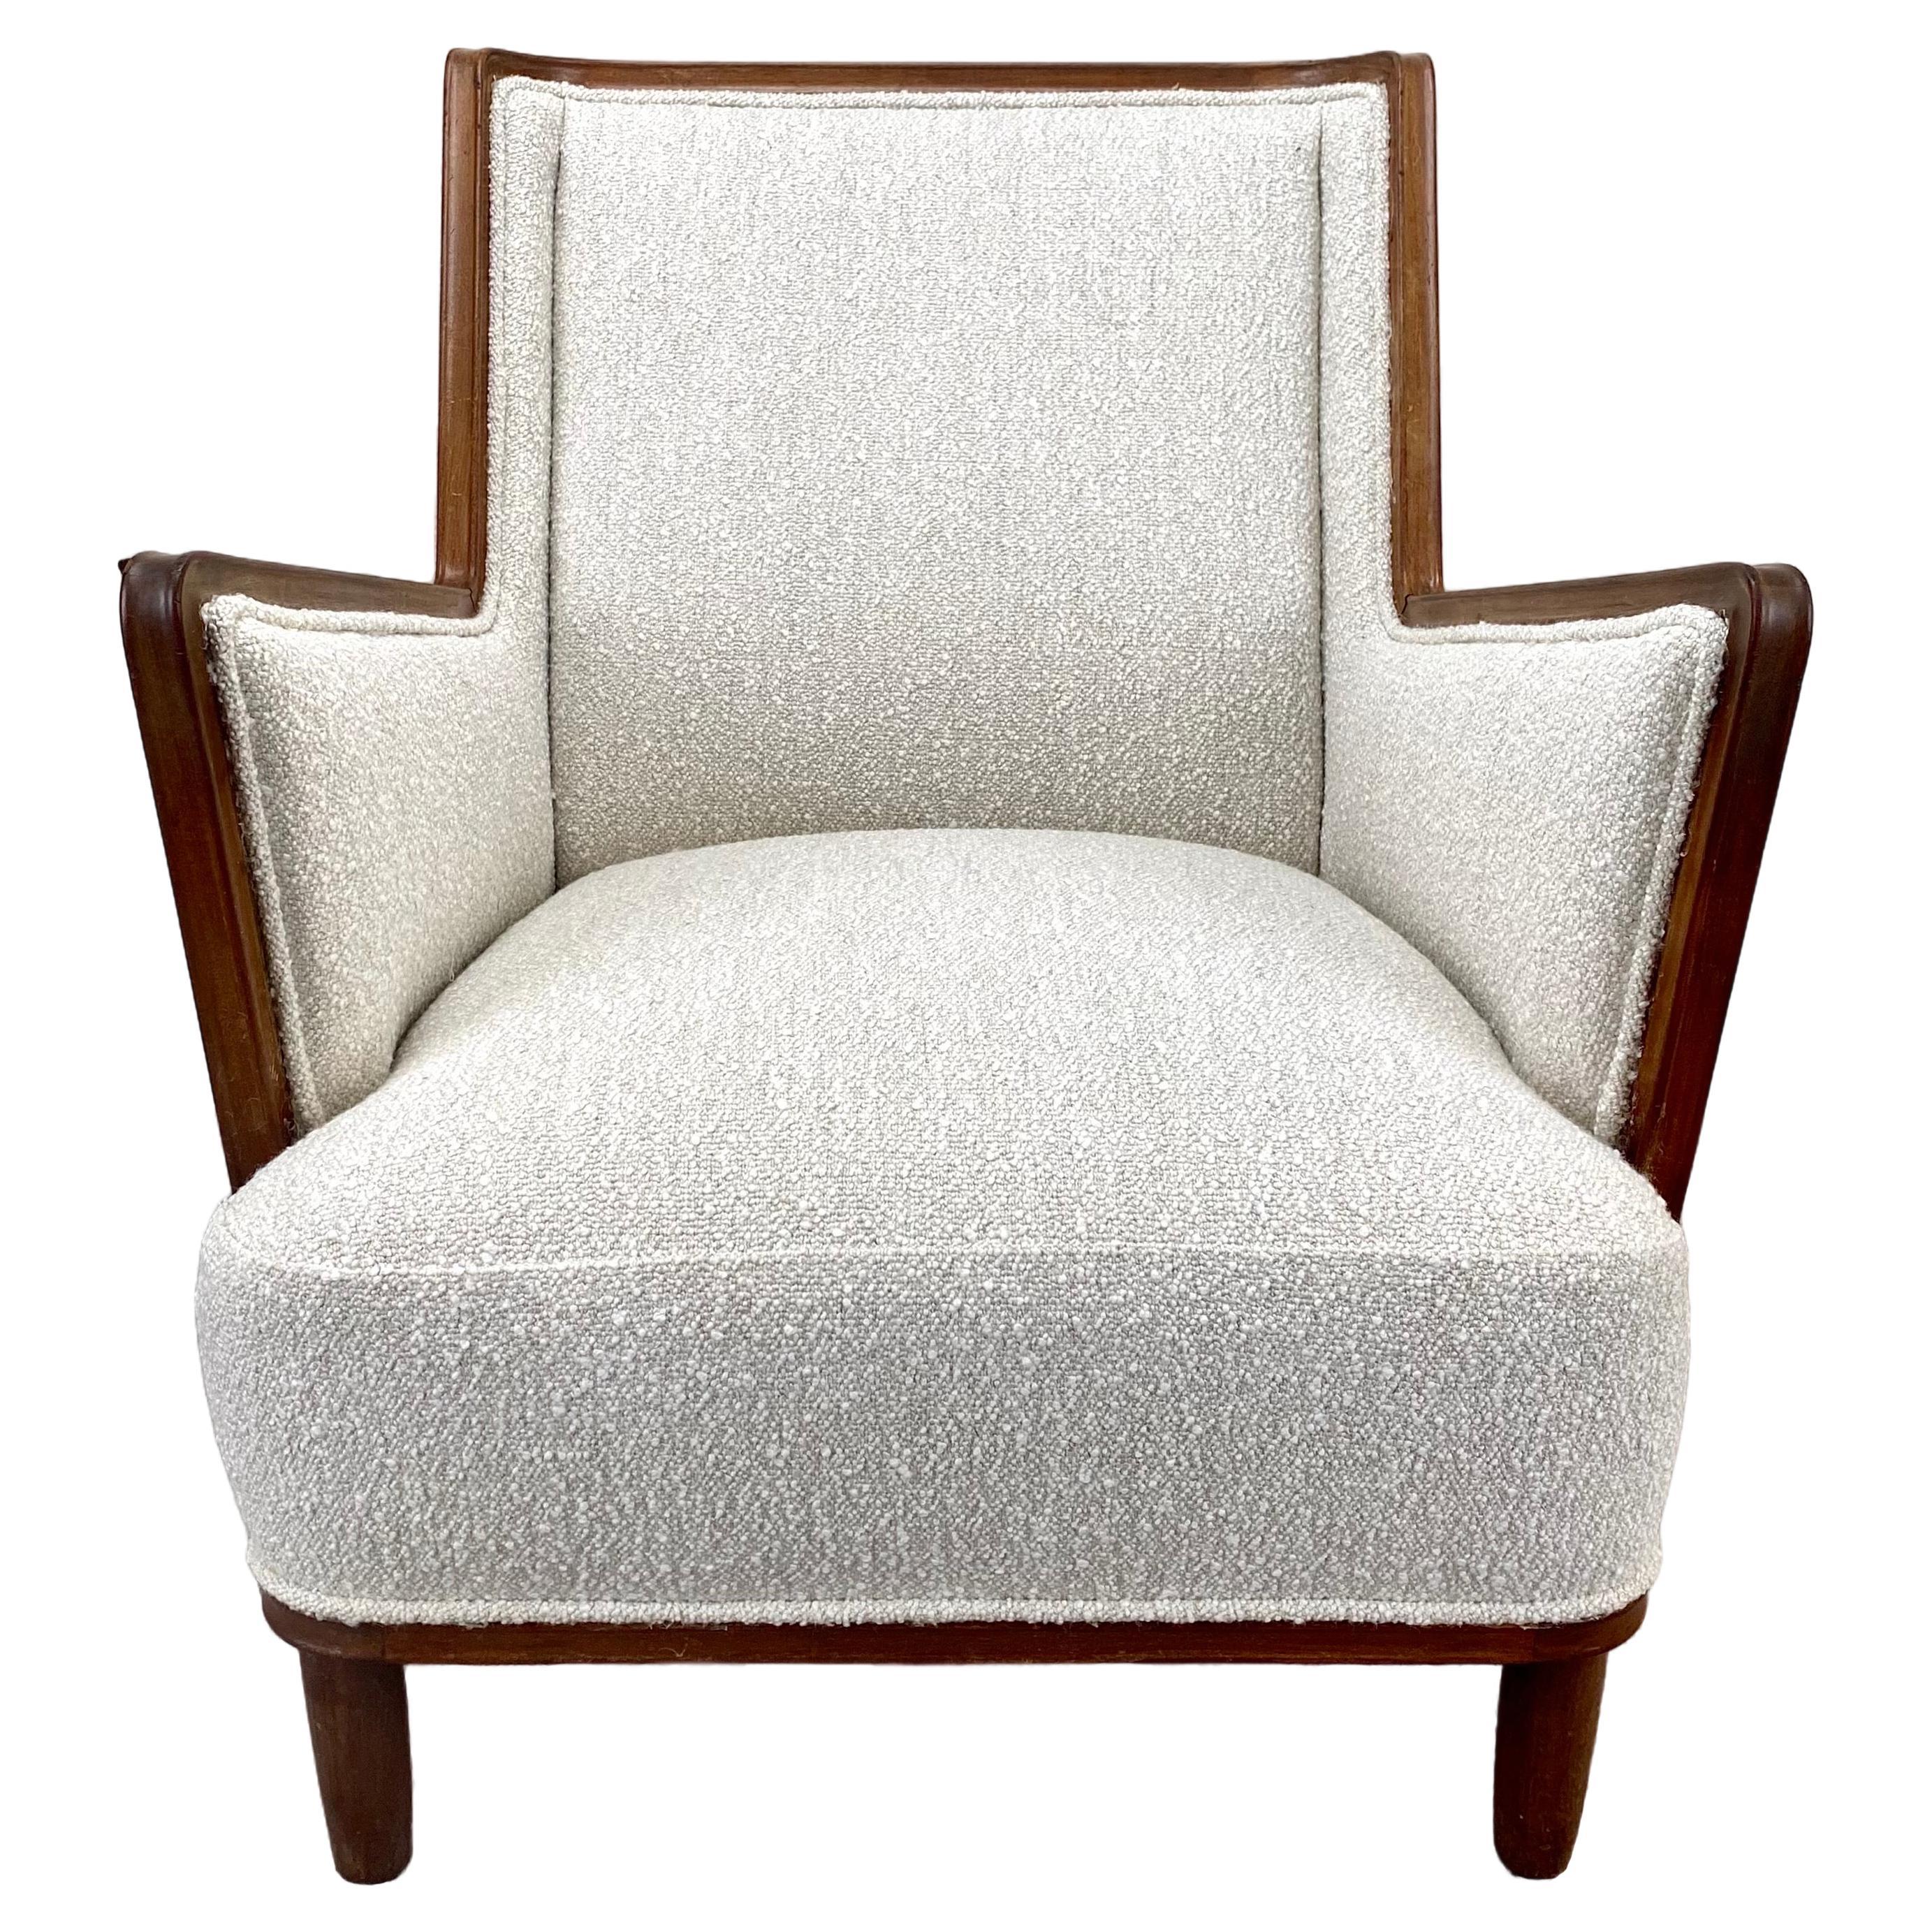 A Mid Century Modern Finish lounge chair crafted  by a masterful cabinetmaker. This resplendent piece of furniture boasts a mahogany frame, painstakingly hand-carved to evoke a sense of enduring sophistication. Notably distinguished by its artfully